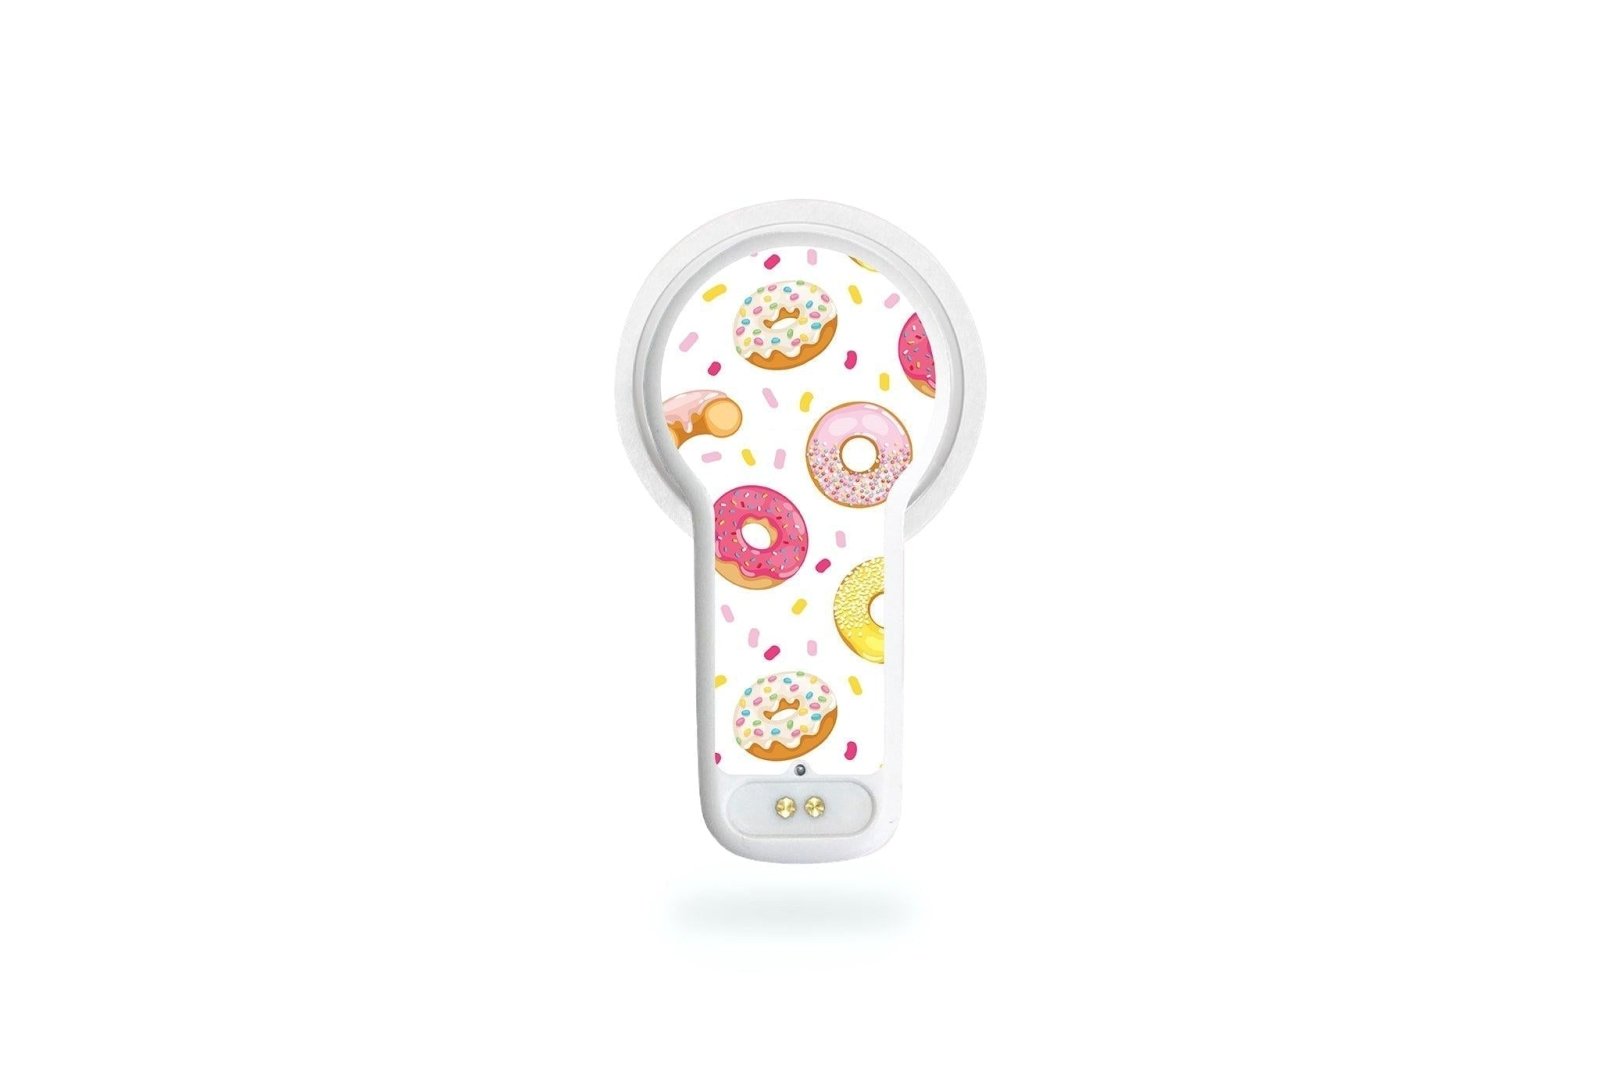 Donut Sticker for MiaoMiao2 diabetes CGMs and insulin pumps